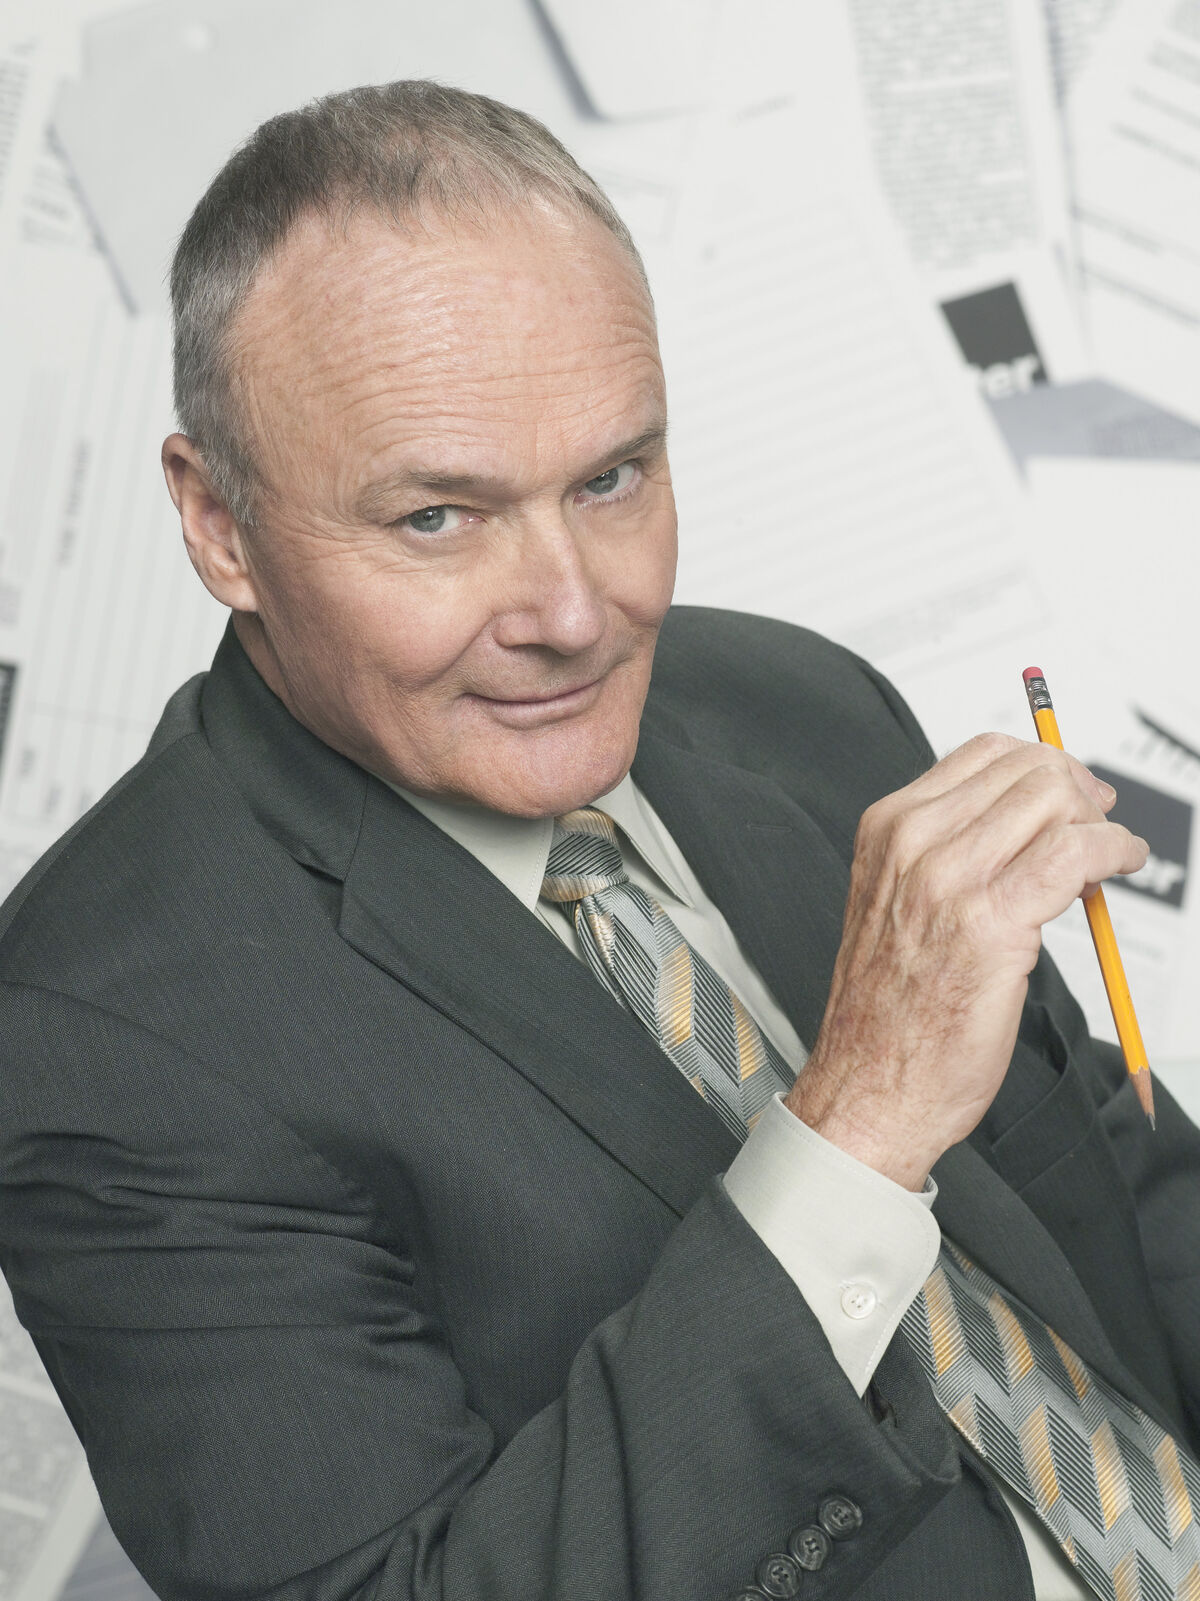 Devon Abner's Depature On 'The Office' Gave Rise To Creed Bratton